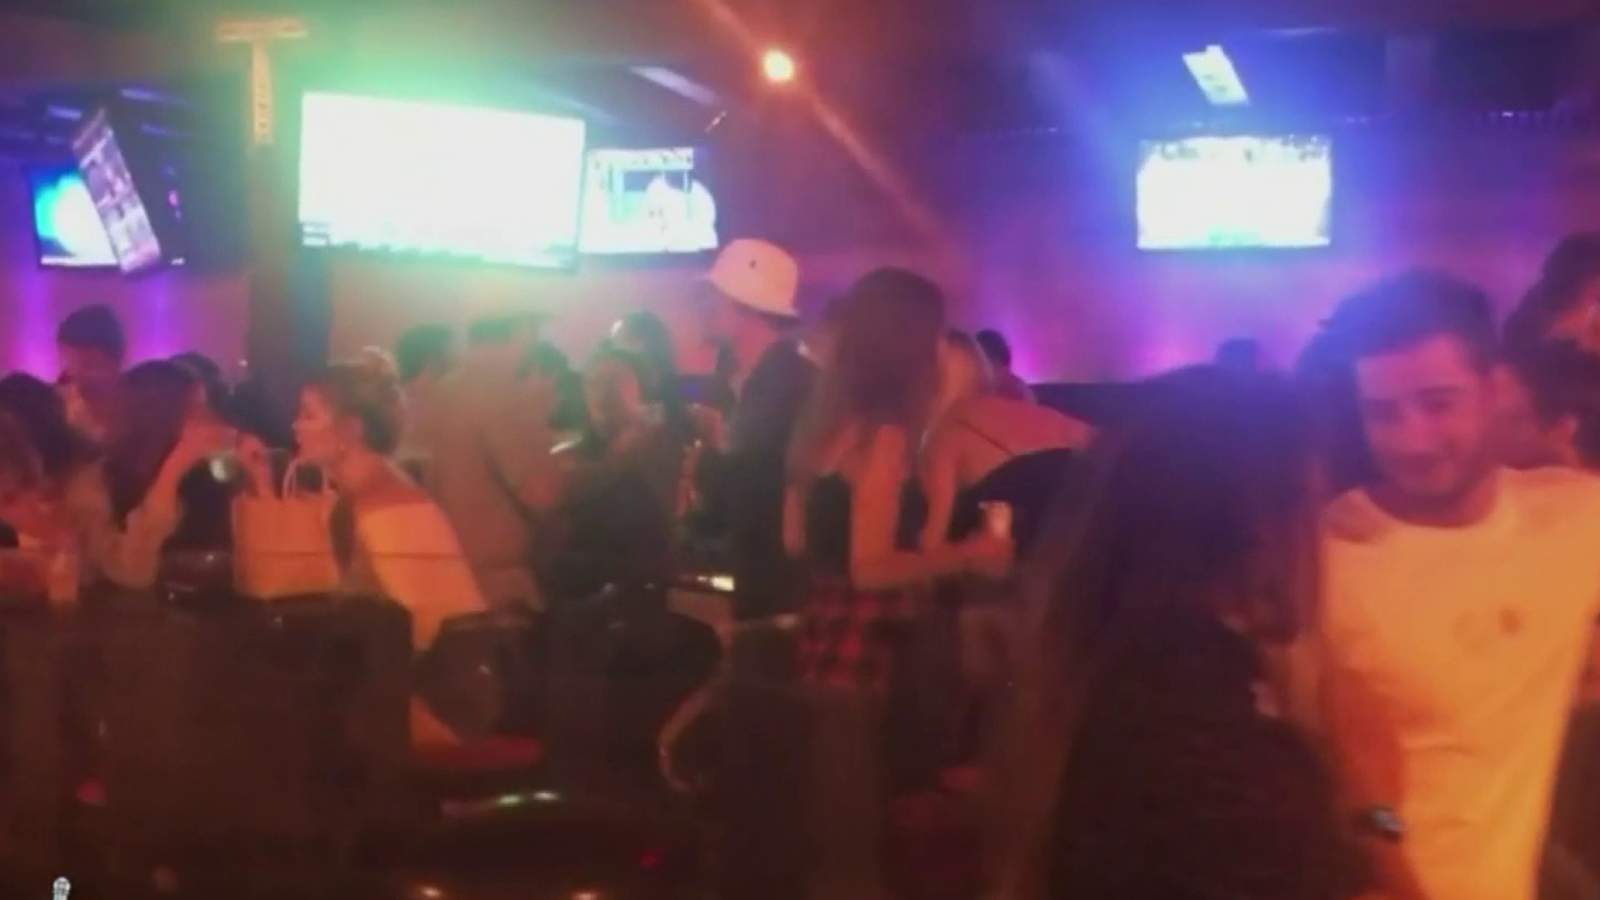 Video shows Royal Oak bar linked to COVID-19 cases was crowded without social distancing